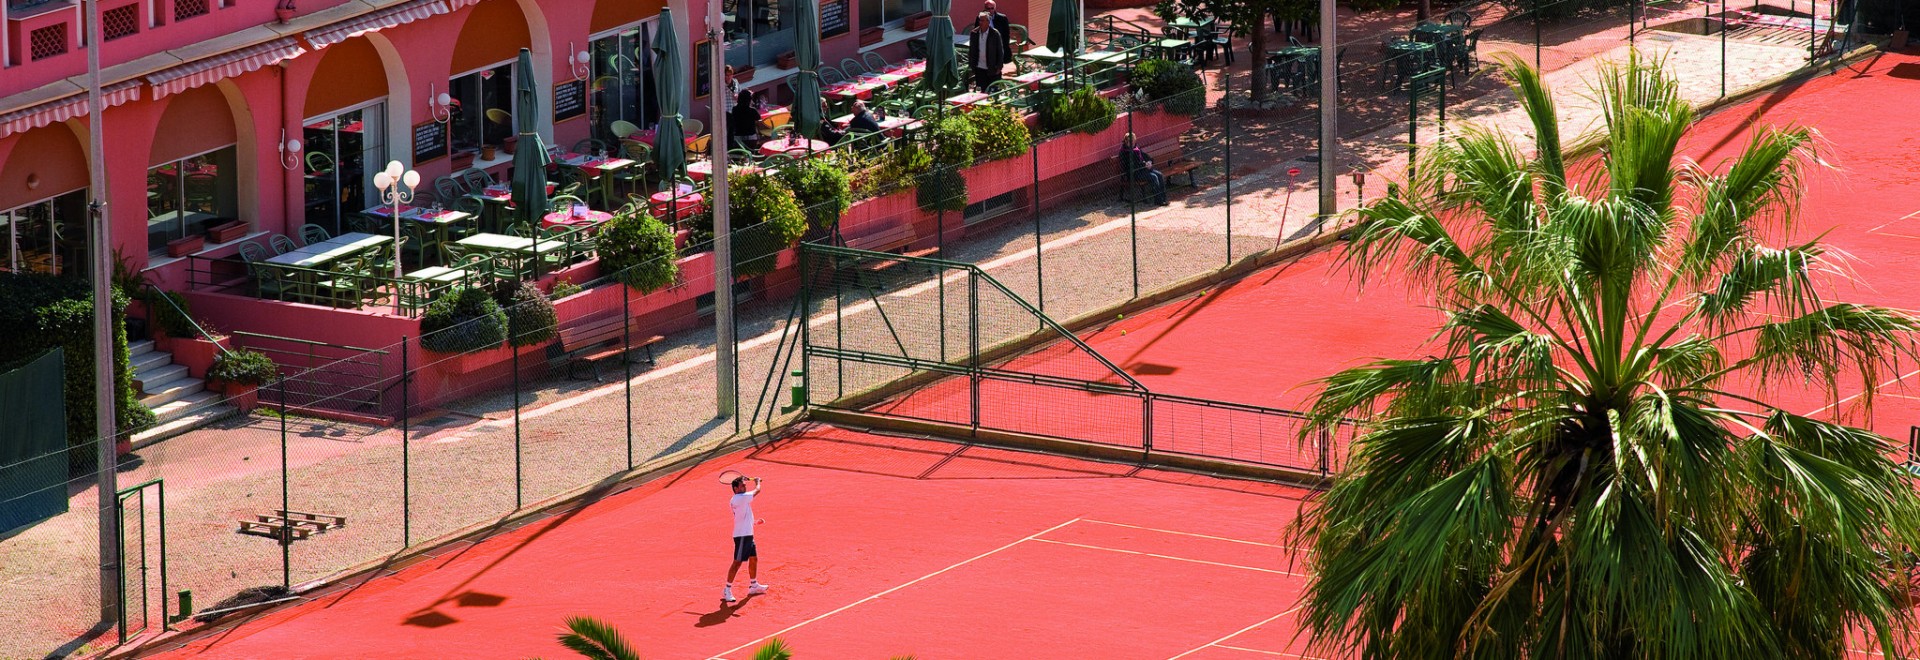 Half-Day Access and 1-Hour Tennis Lesson - Nice Lawn Tennis Club, Nice